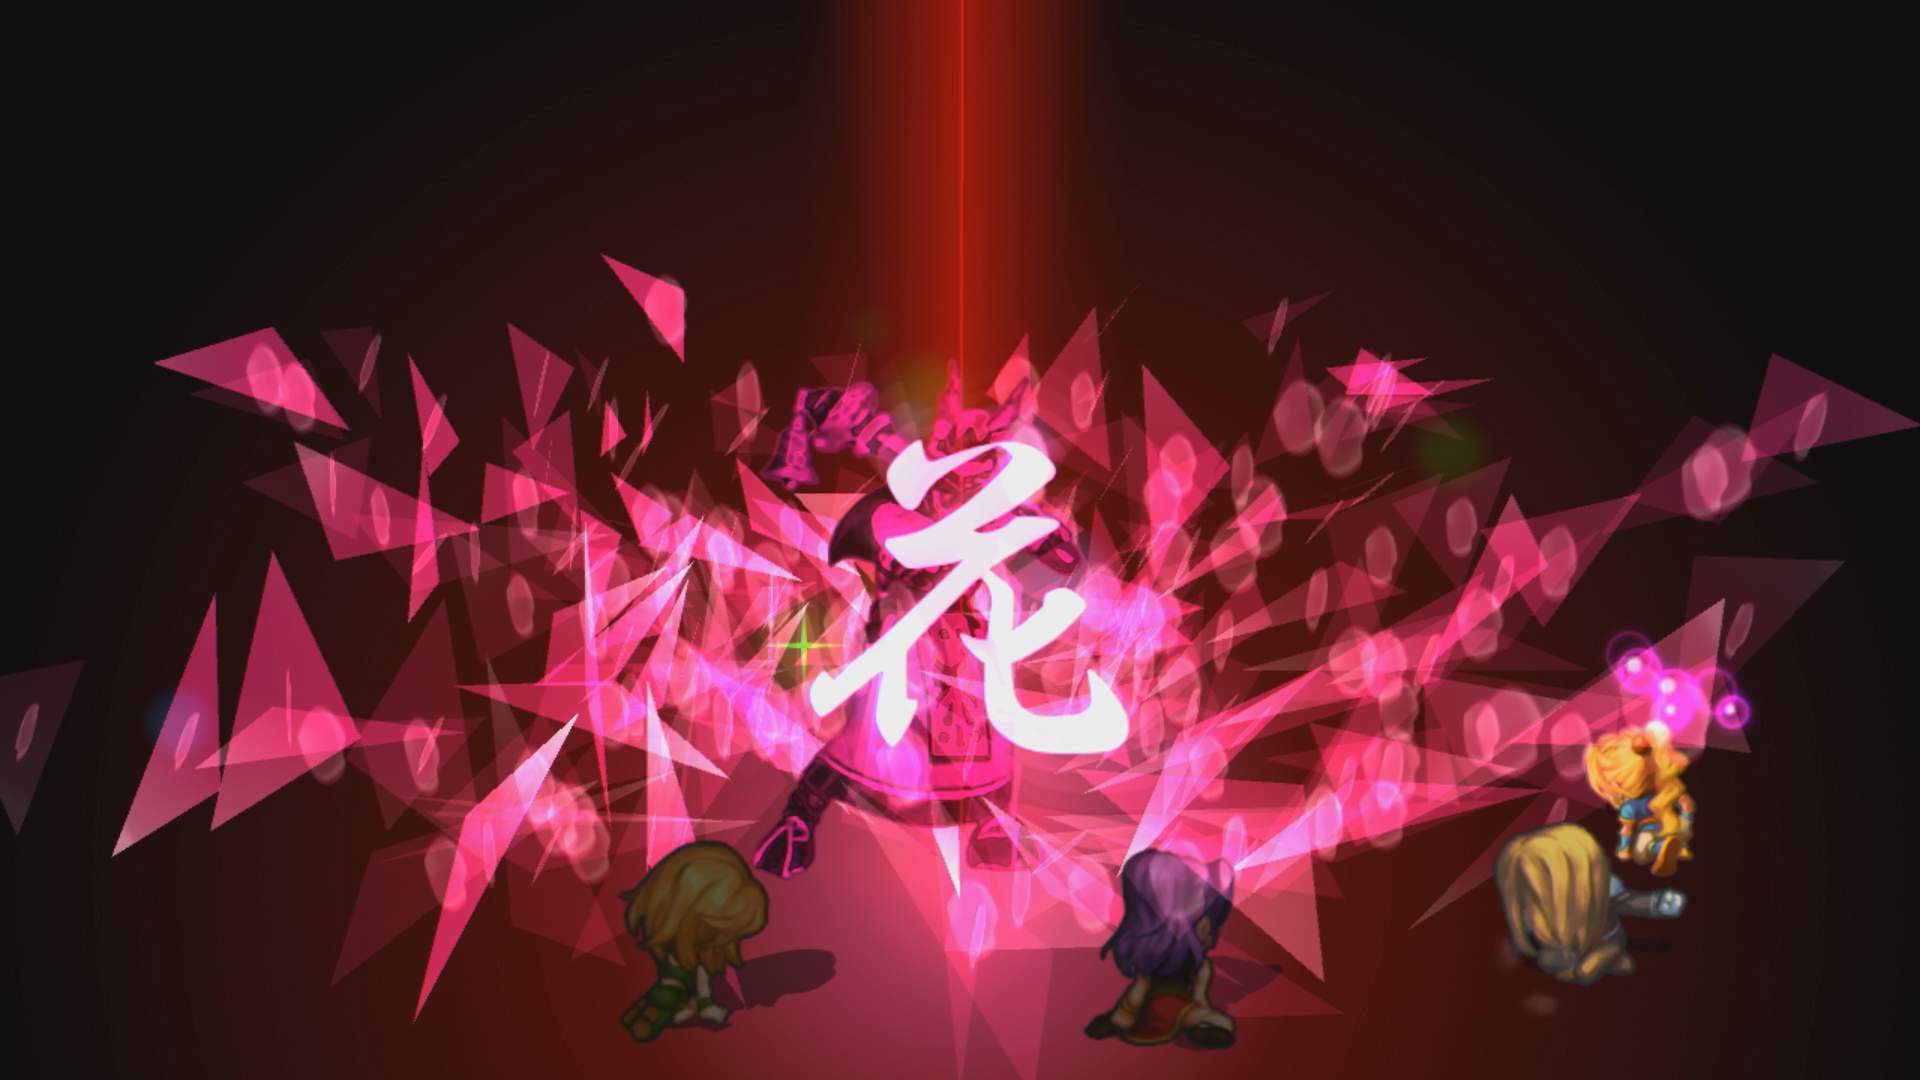 SaGa Frontier Remastered battle screen showing 4 characters at the front, using a move on an enemy. The move effect shows pink fragments with a Kanji character in the centre.